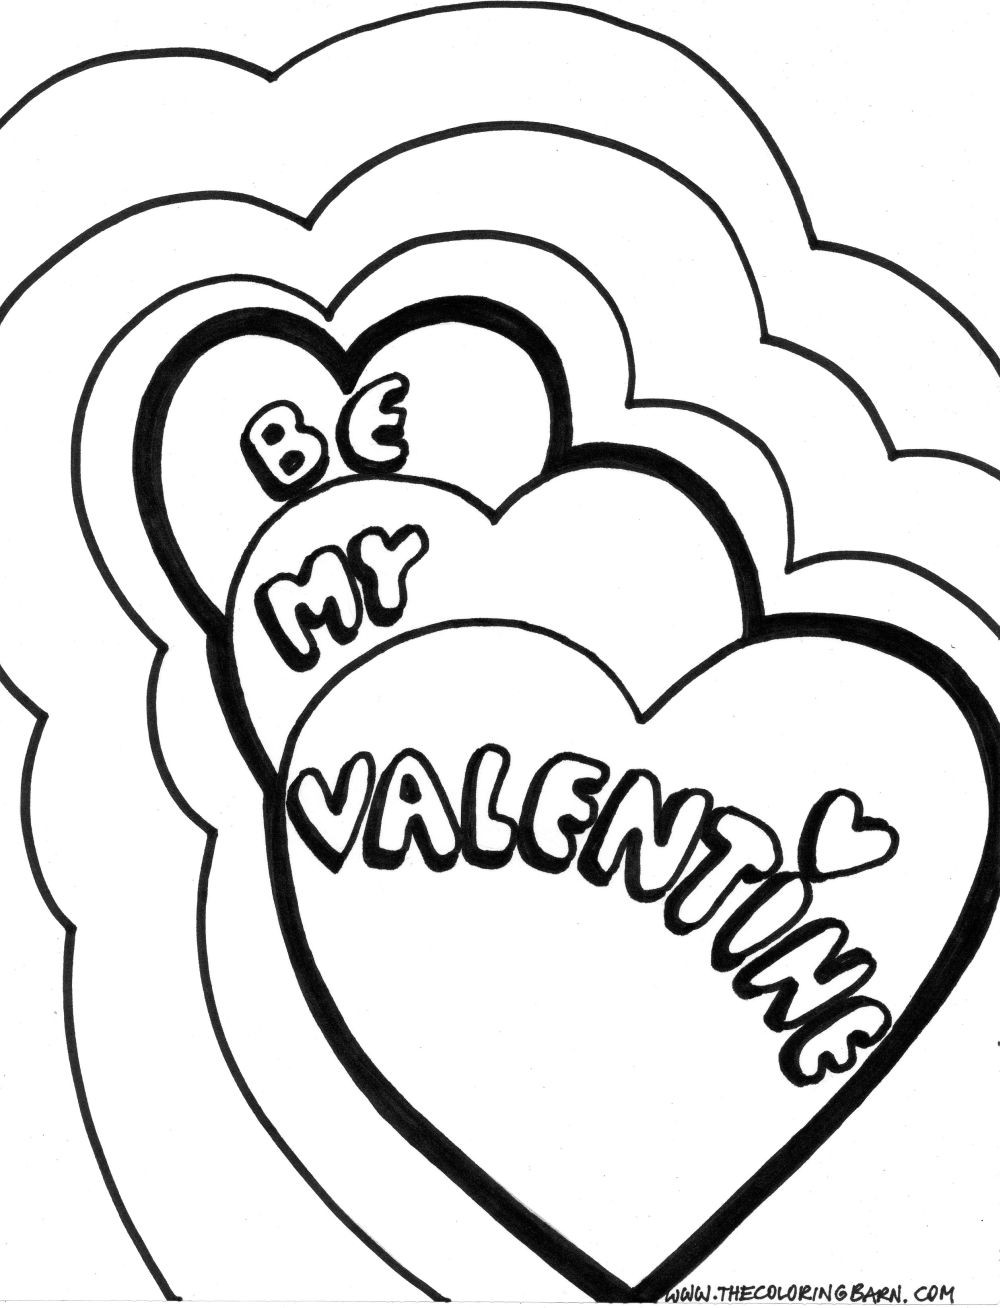 Valentine Coloring Sheets Free Printable
 Free Printable Valentine Day Coloring Pages